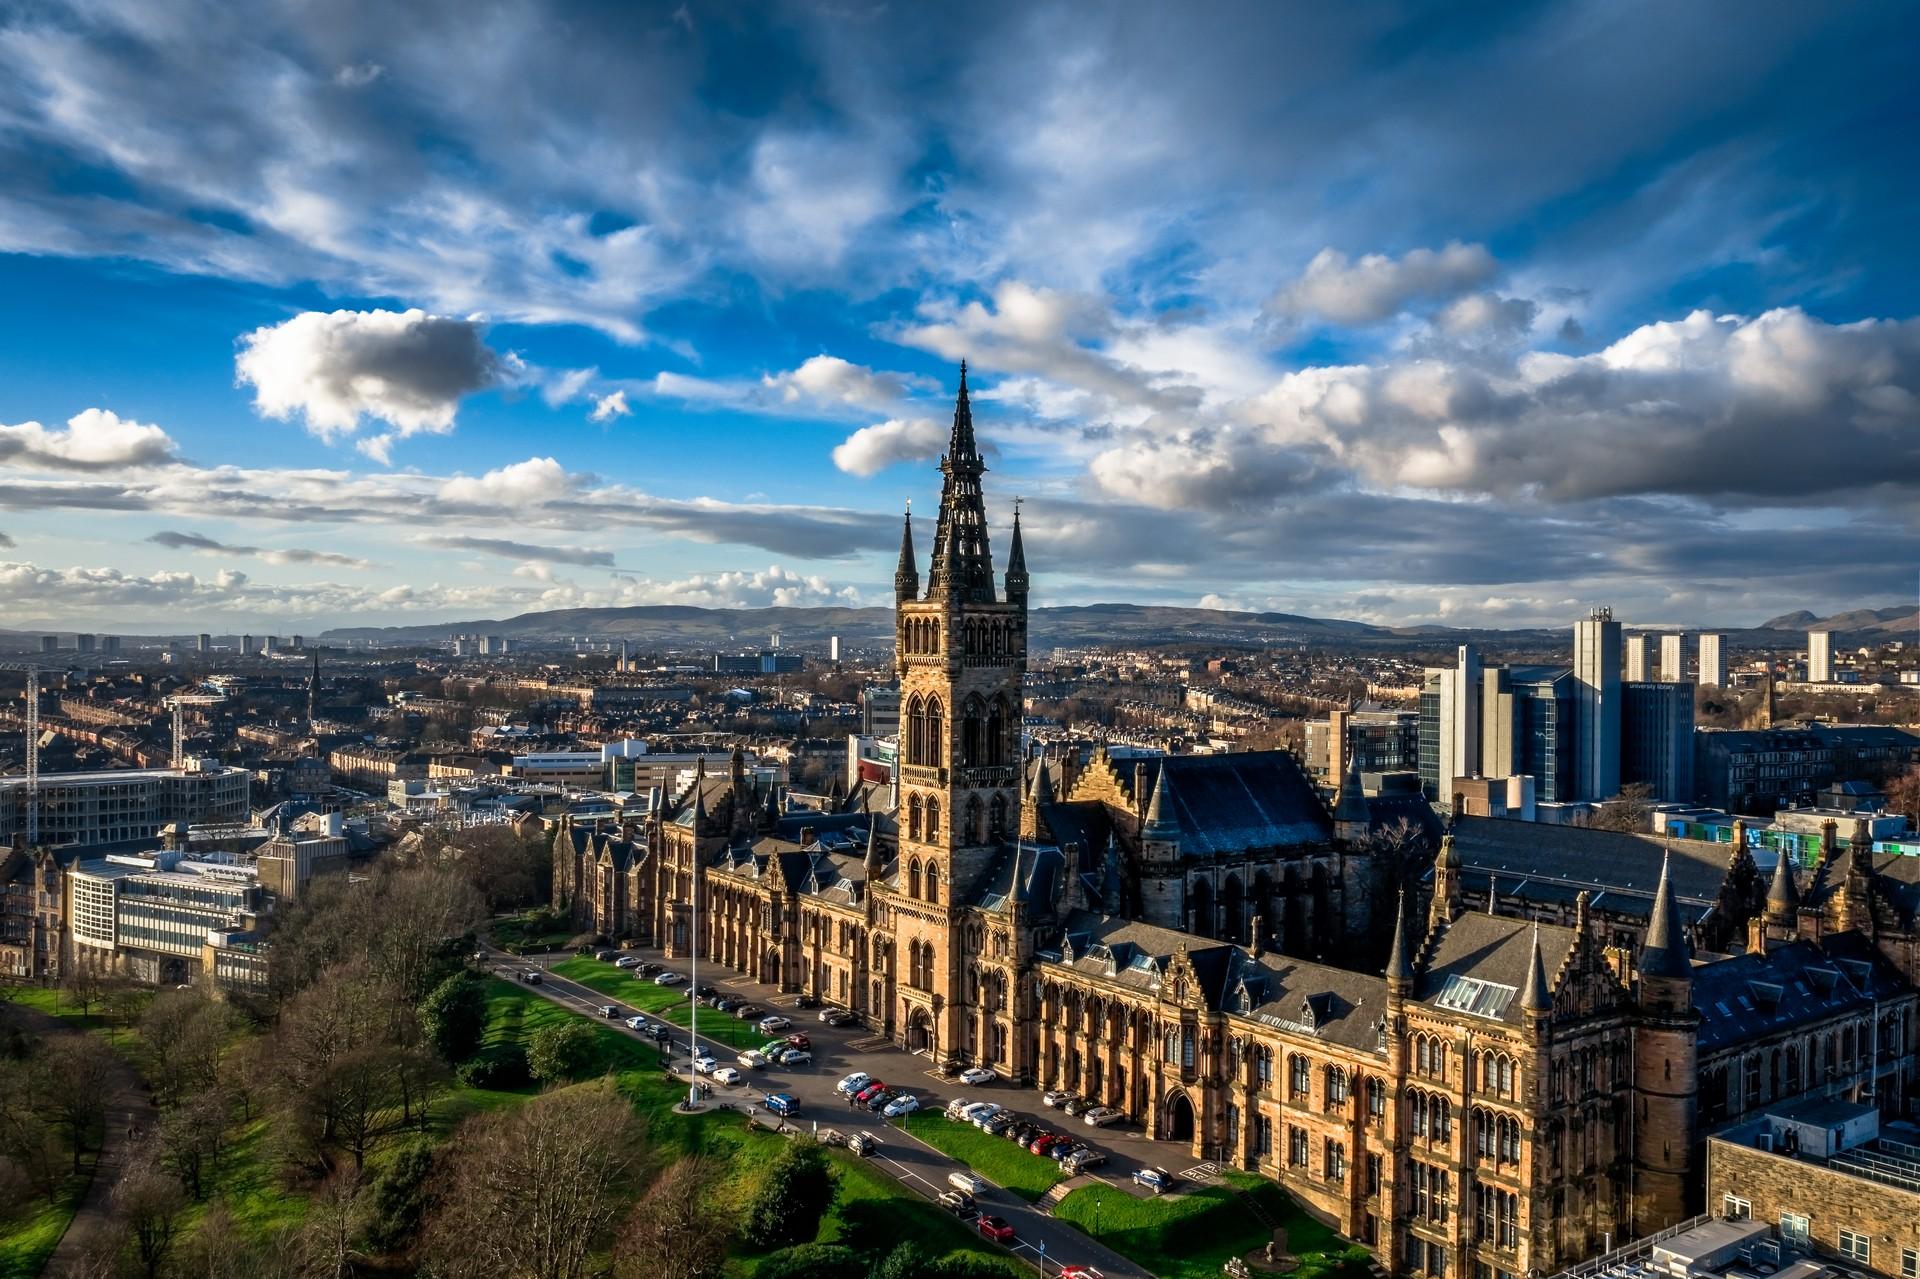 Aerial view of architecture in Glasgow on a sunny day with some clouds